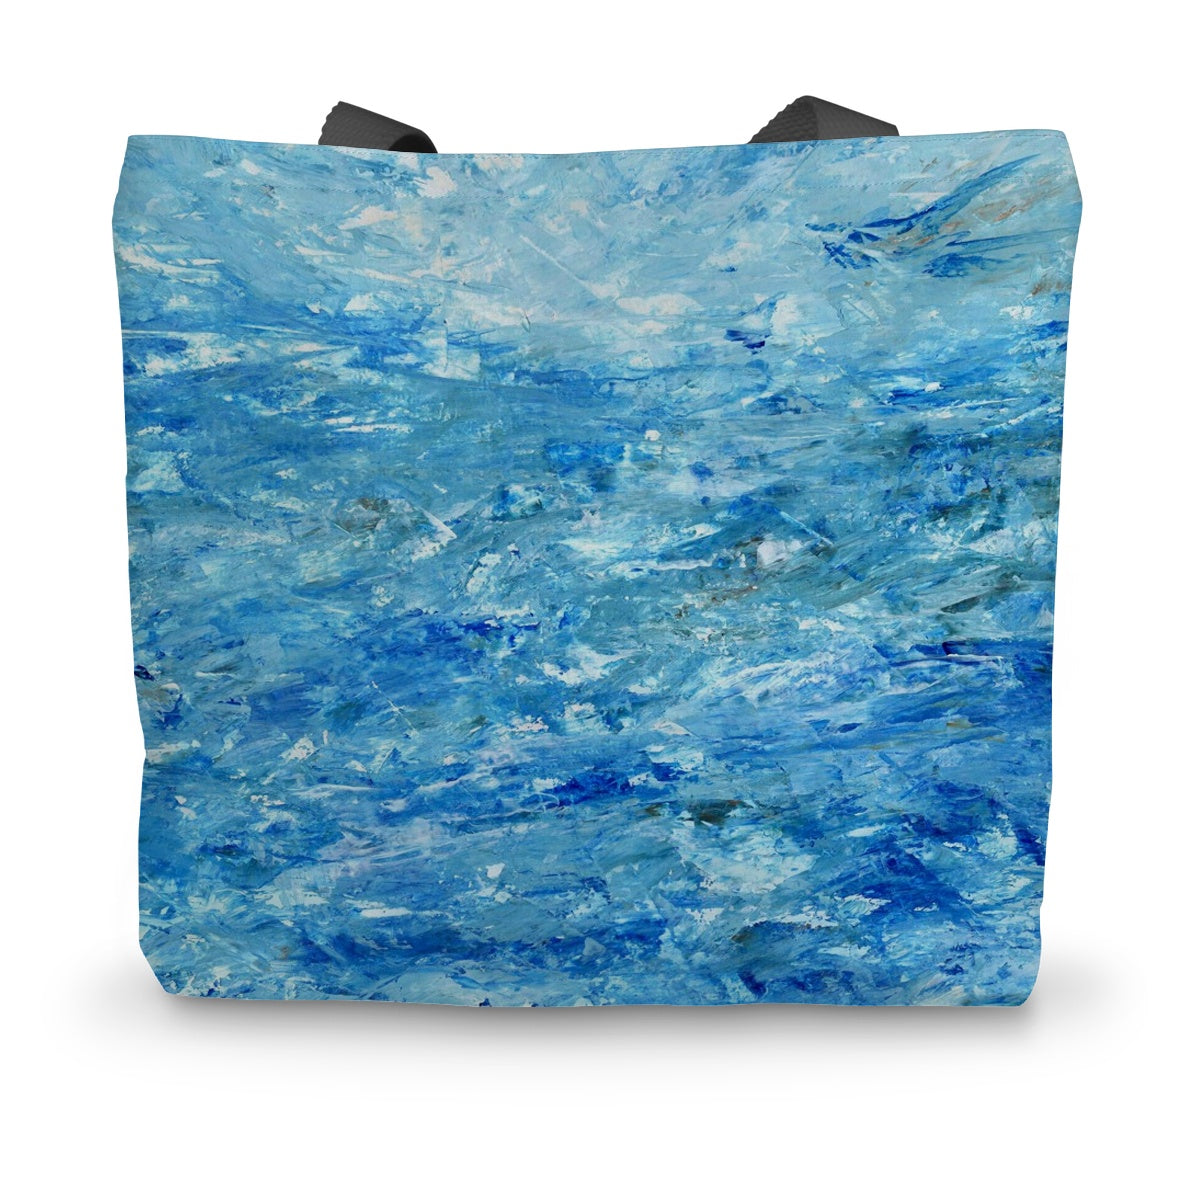 Ocean Water Tote Bag - Nautical Clothing - Abstract Seascape - Turquoise Shopper Bag - Blue Grocery Bag - Sturdy Shopping Bag - Nature Inspired